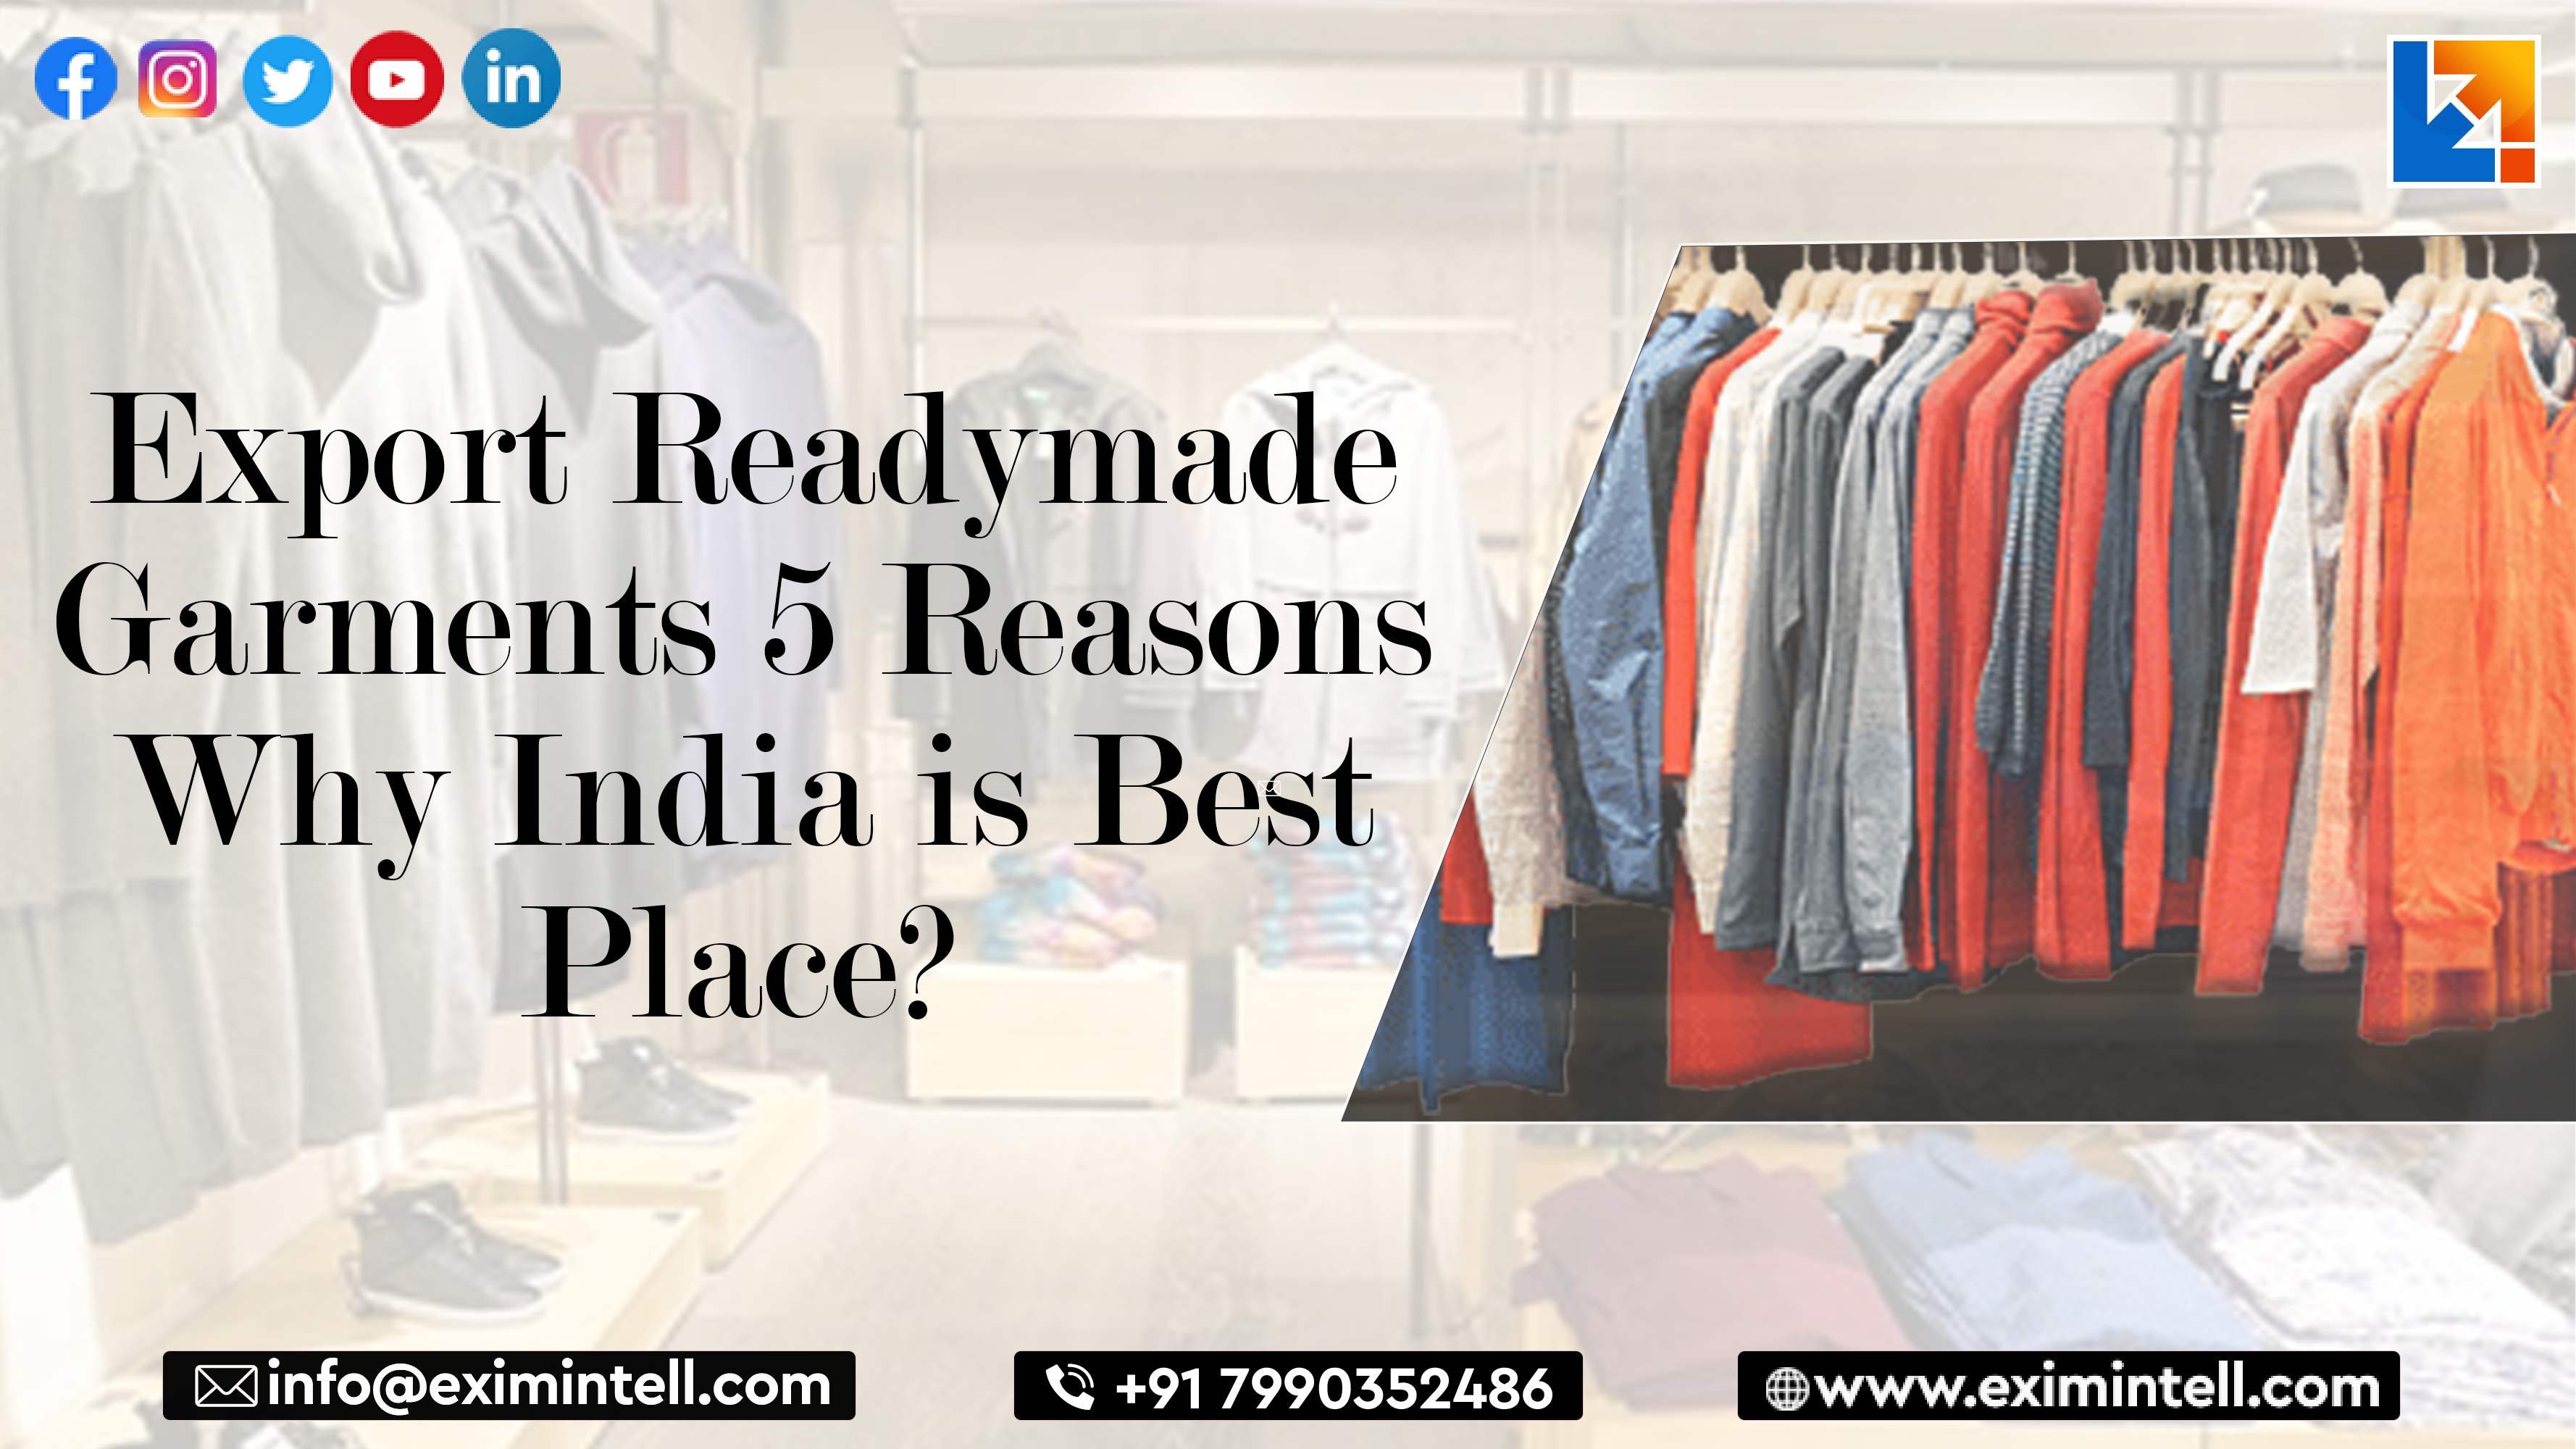 Export Readymade Garments 5 Reasons Why India is Best Place?